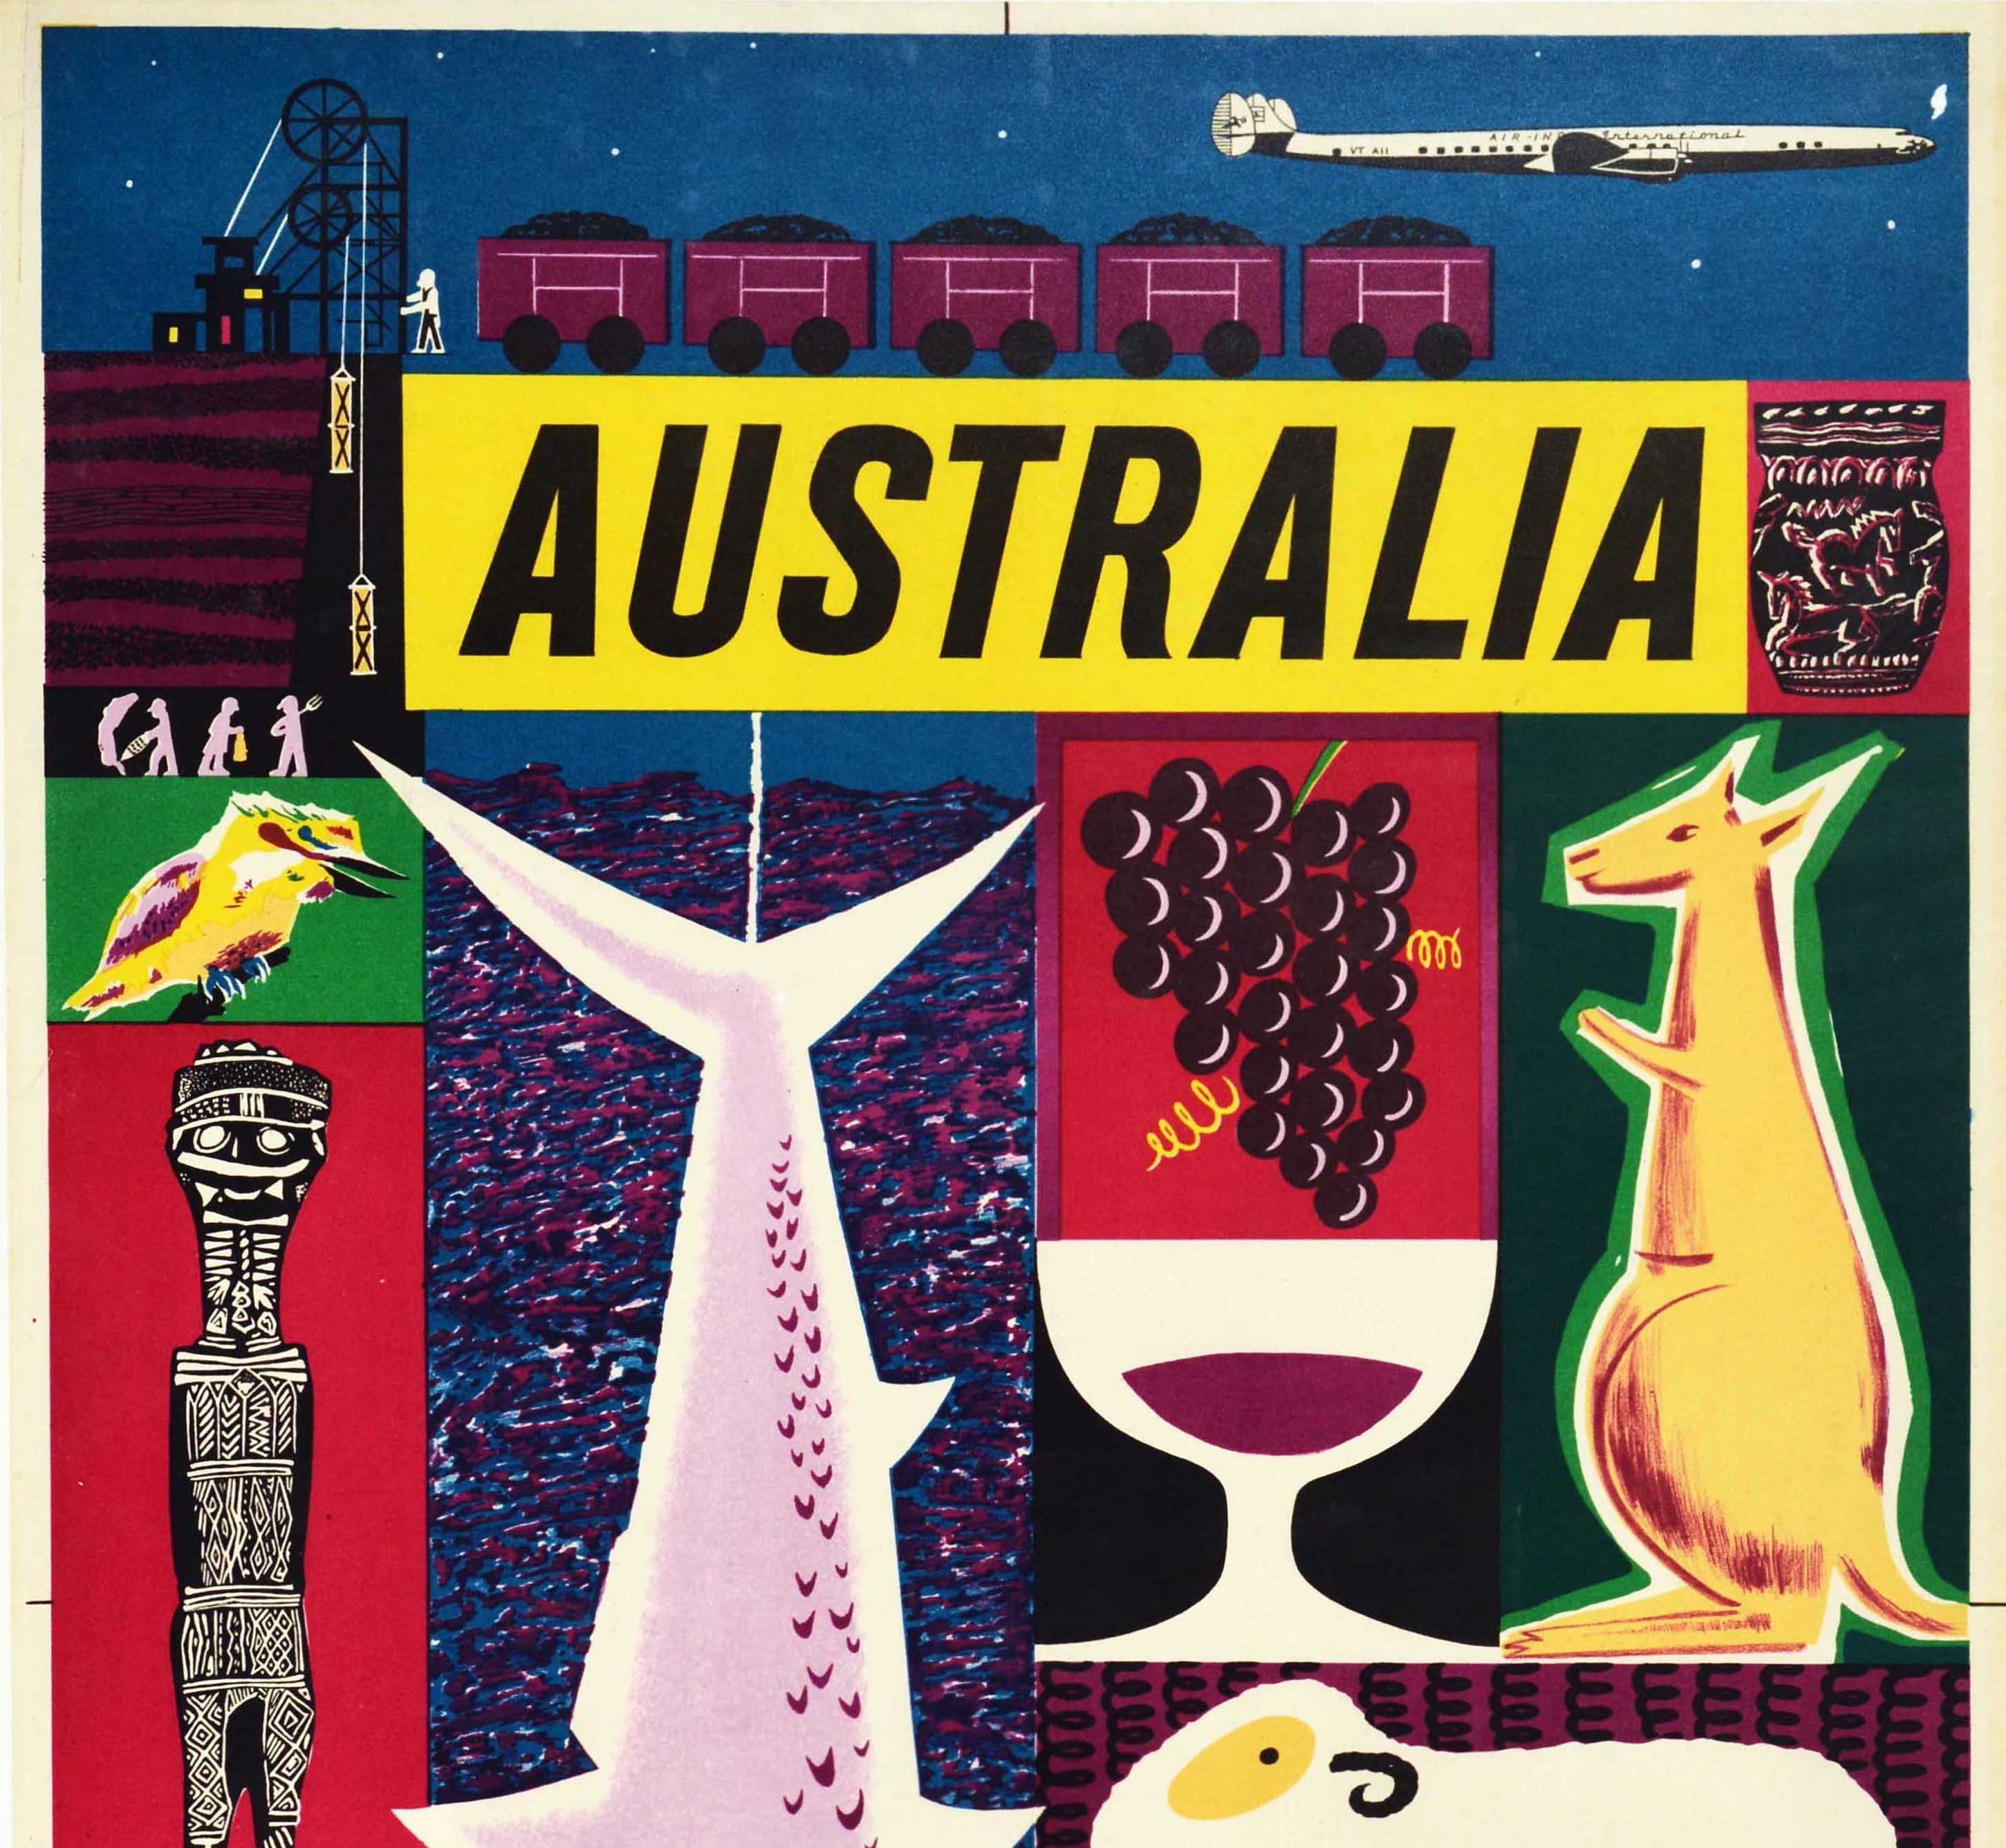 Original vintage travel poster issued by Air-India International for Australia featuring stunning colourful illustrations of a plane flying over people working in a coal mine with a coal train loaded on a railway track above the bold title Australia